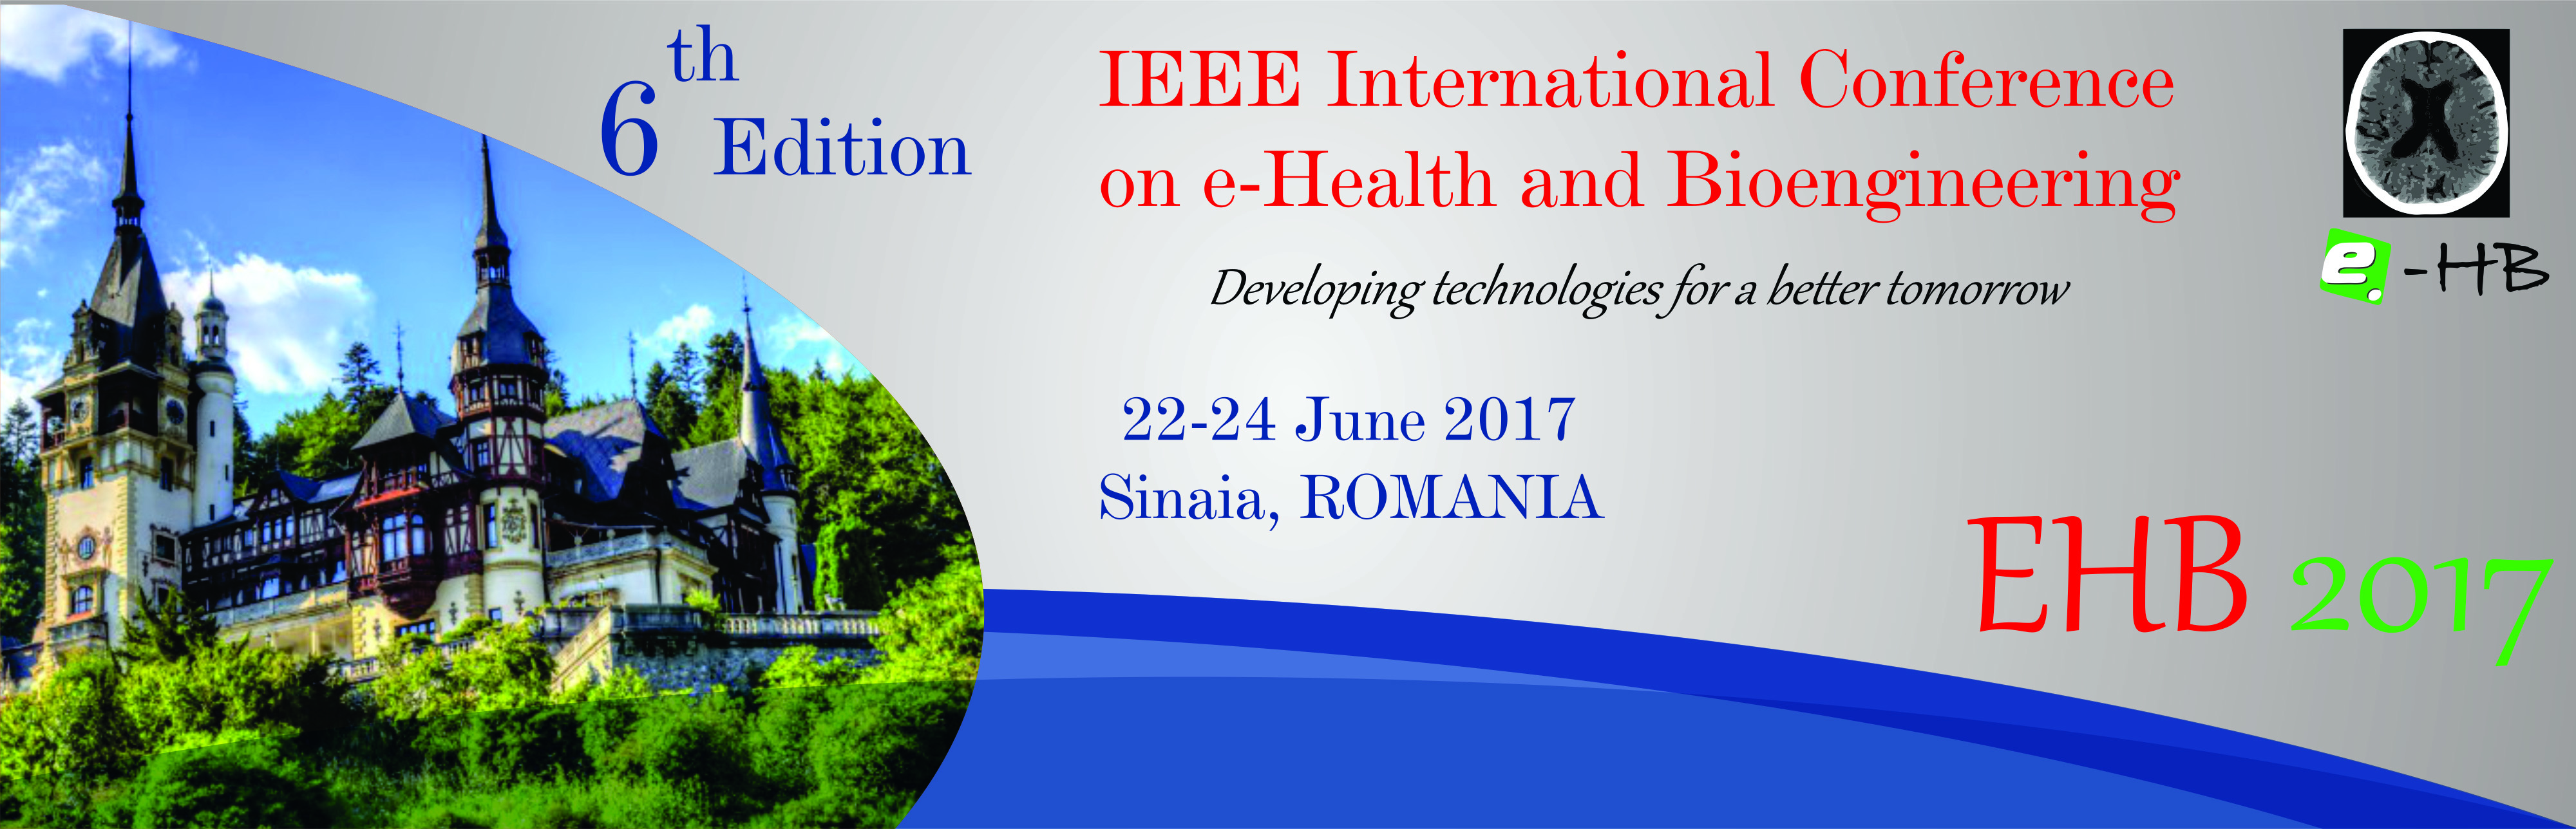 IEEE Conference on e-Health and Bioengineering